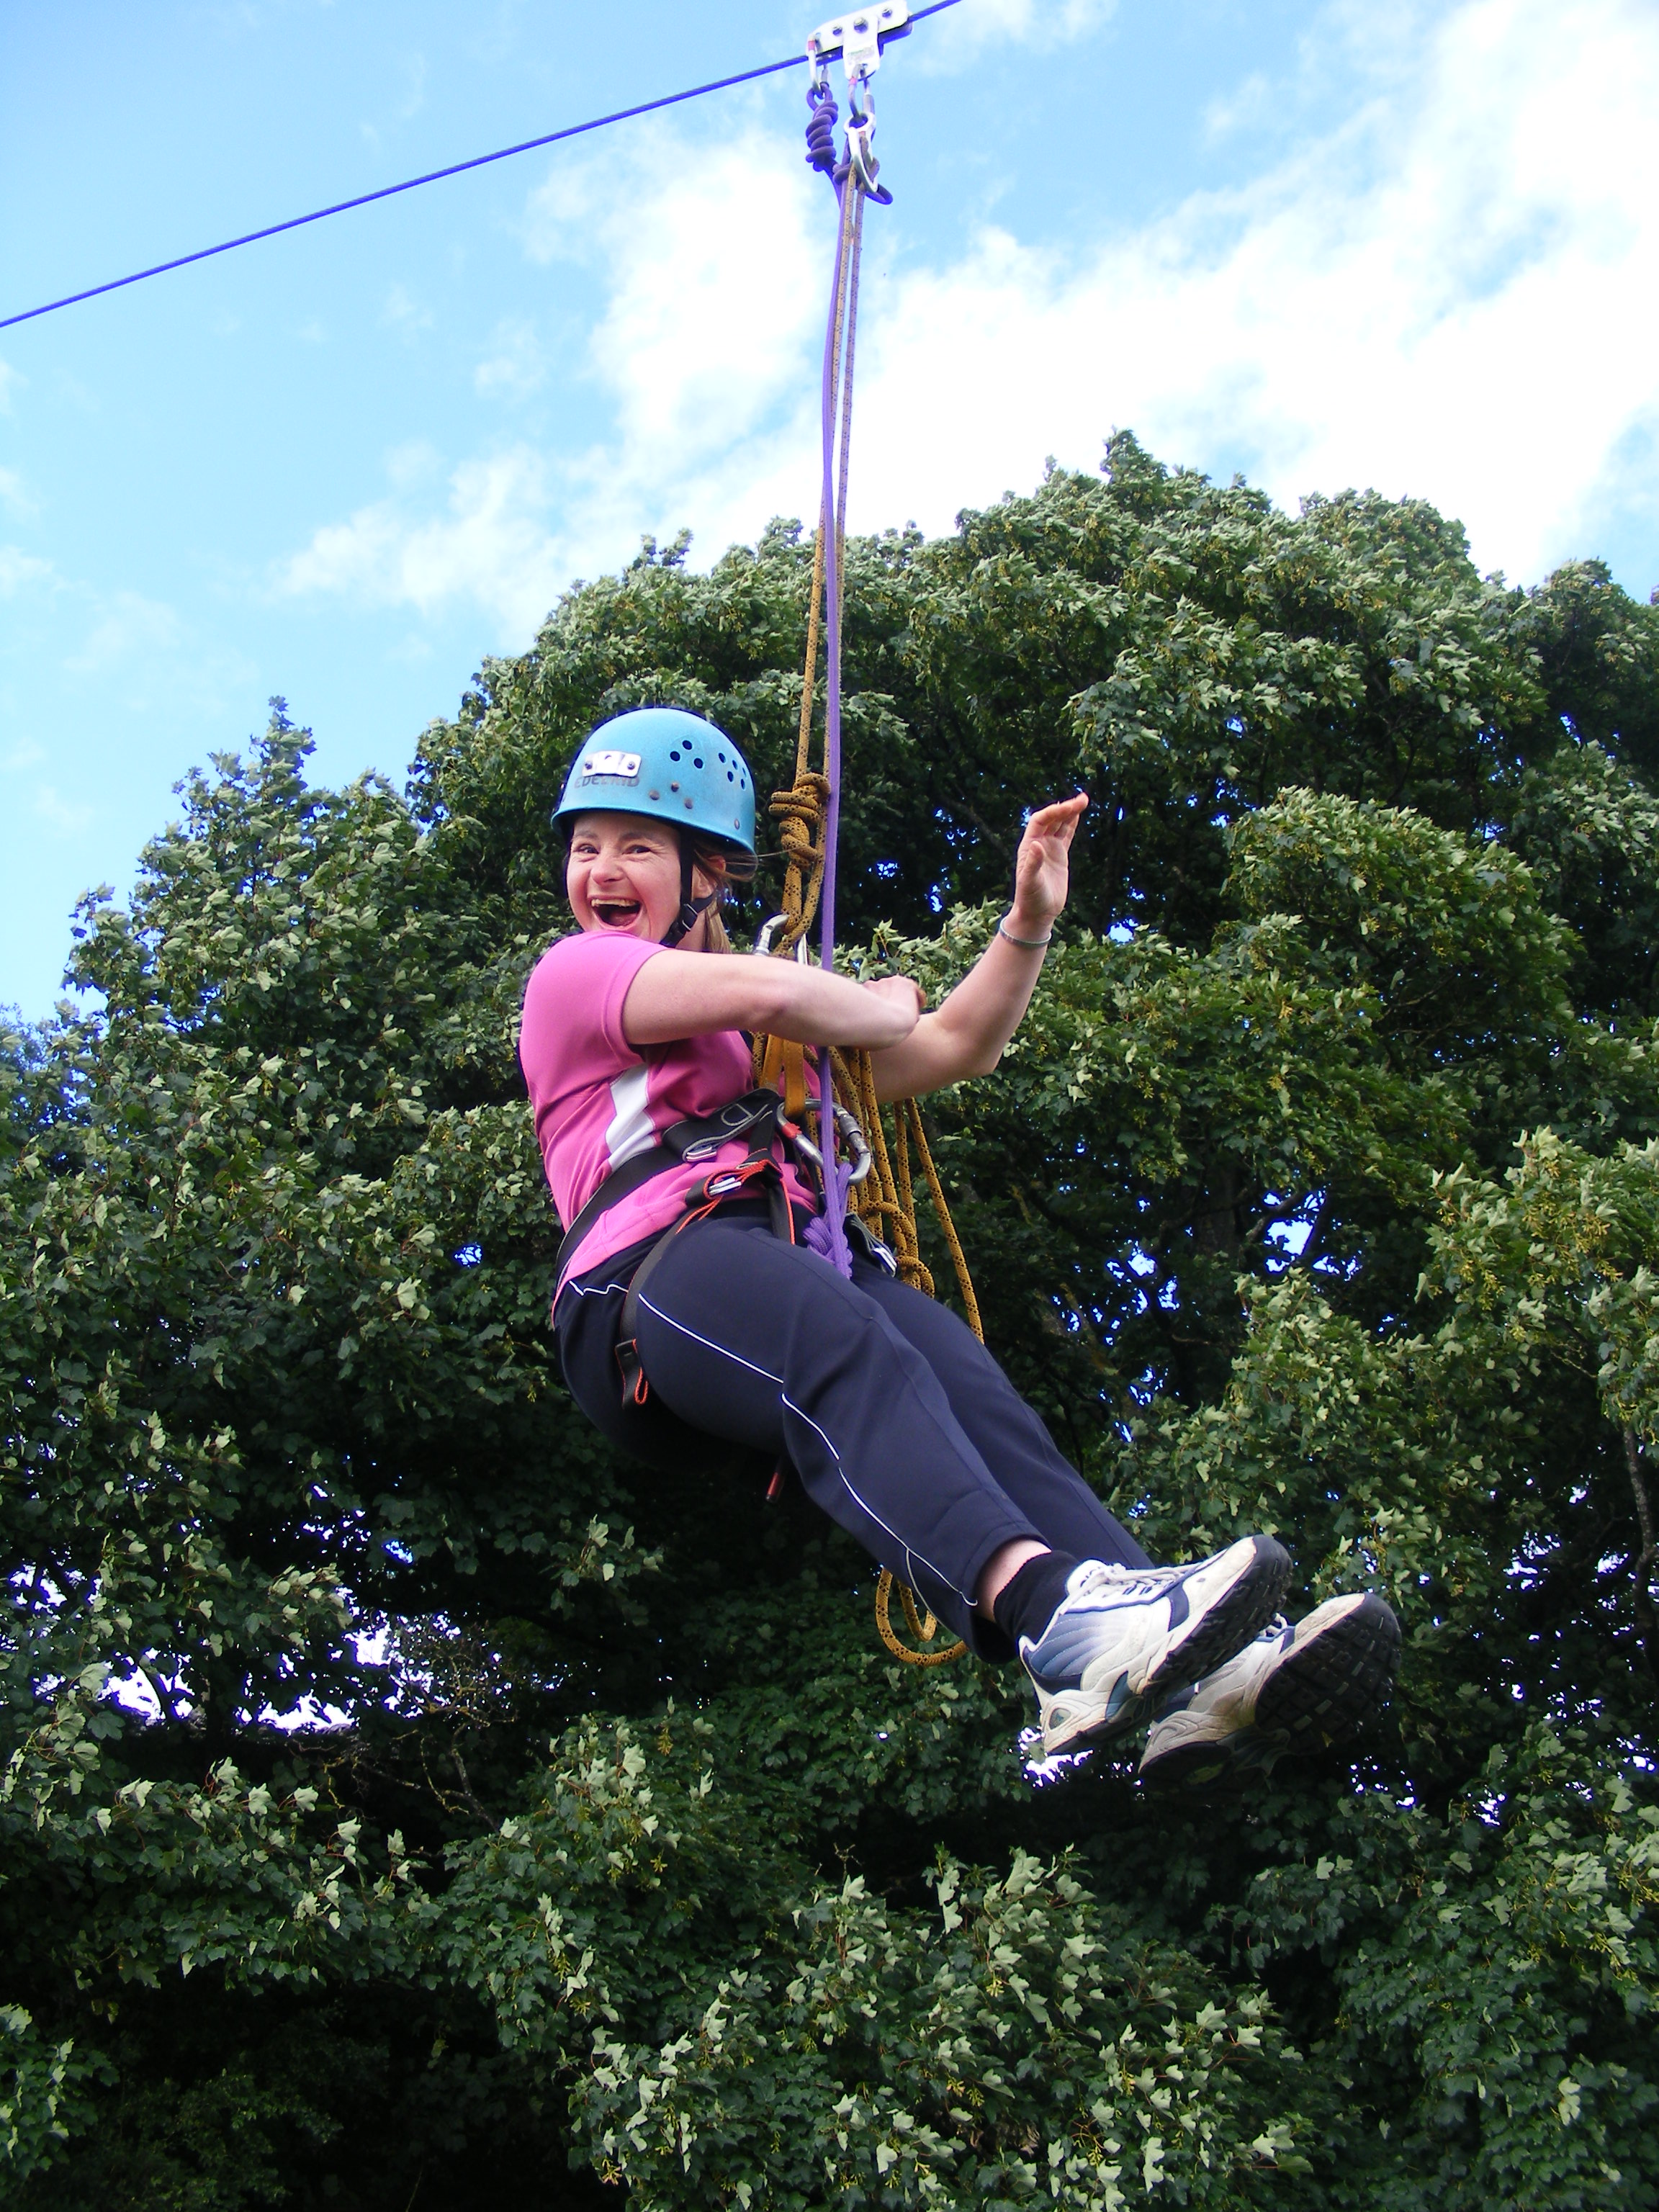 A woman on a zip wire with trees behind